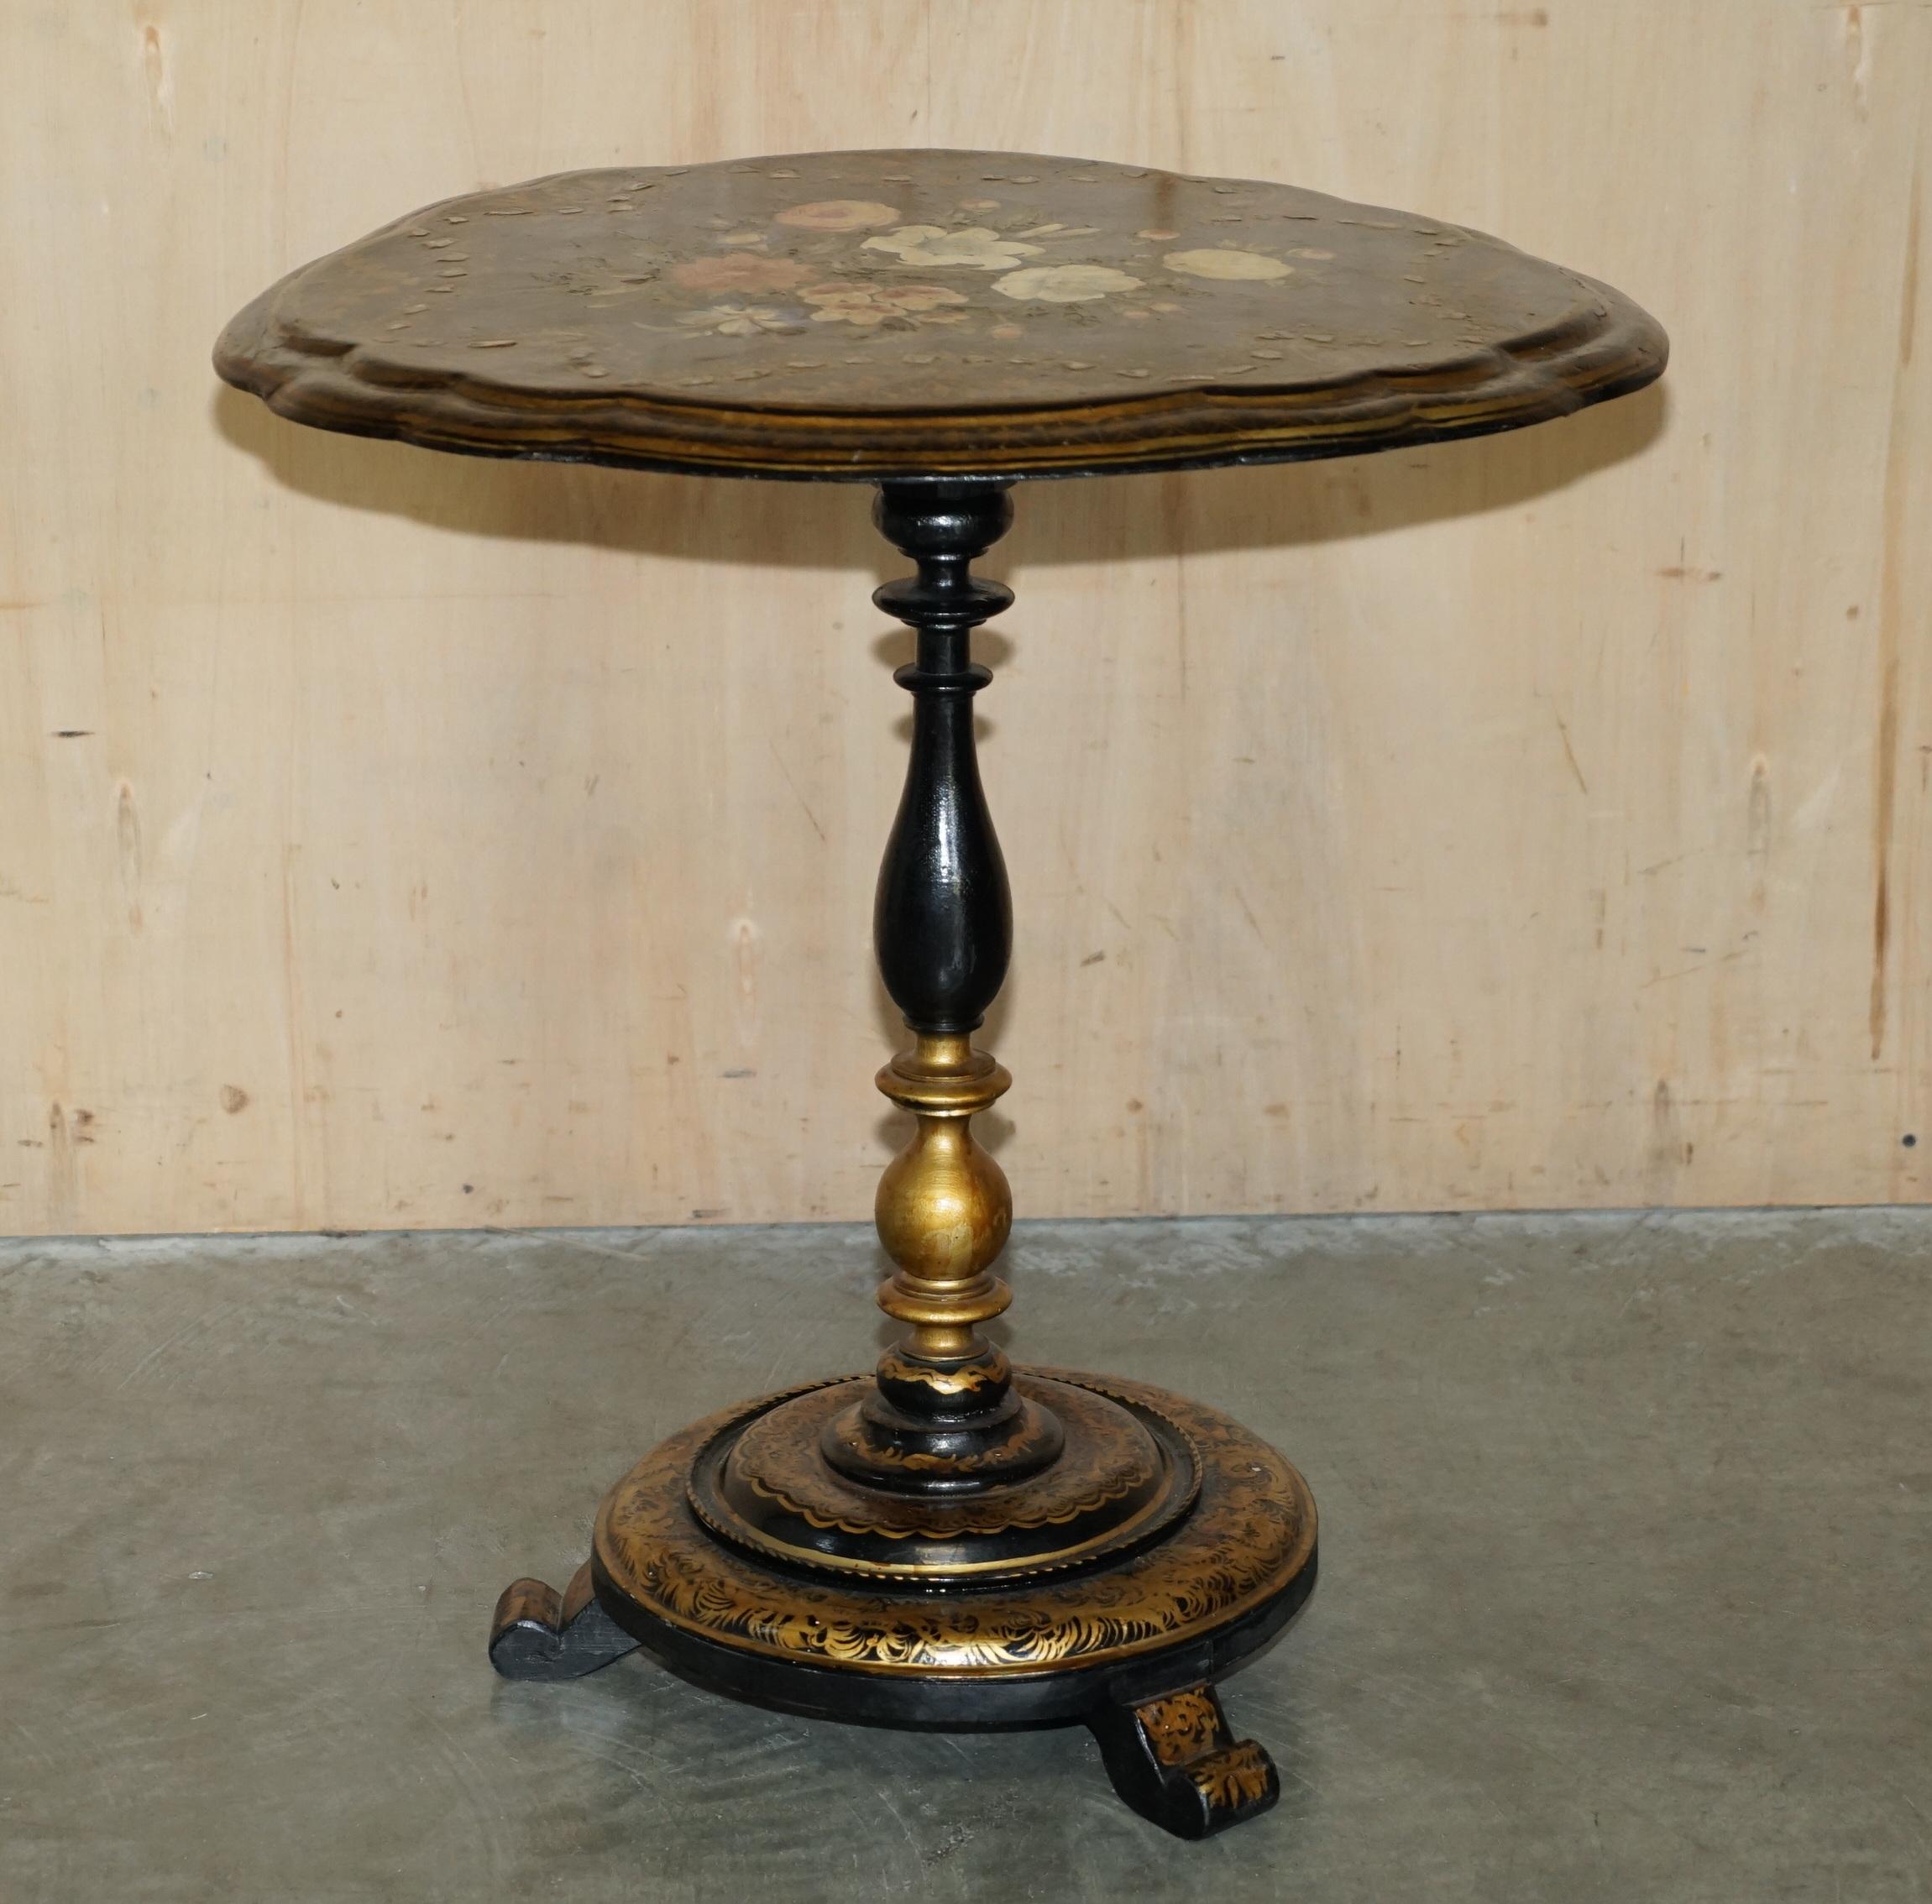 Regency EXQUISITE ANTIQUE REGENCY 1810 LACQUERED MOTHER OF PEARL INLAID TiLT OP TABLE For Sale